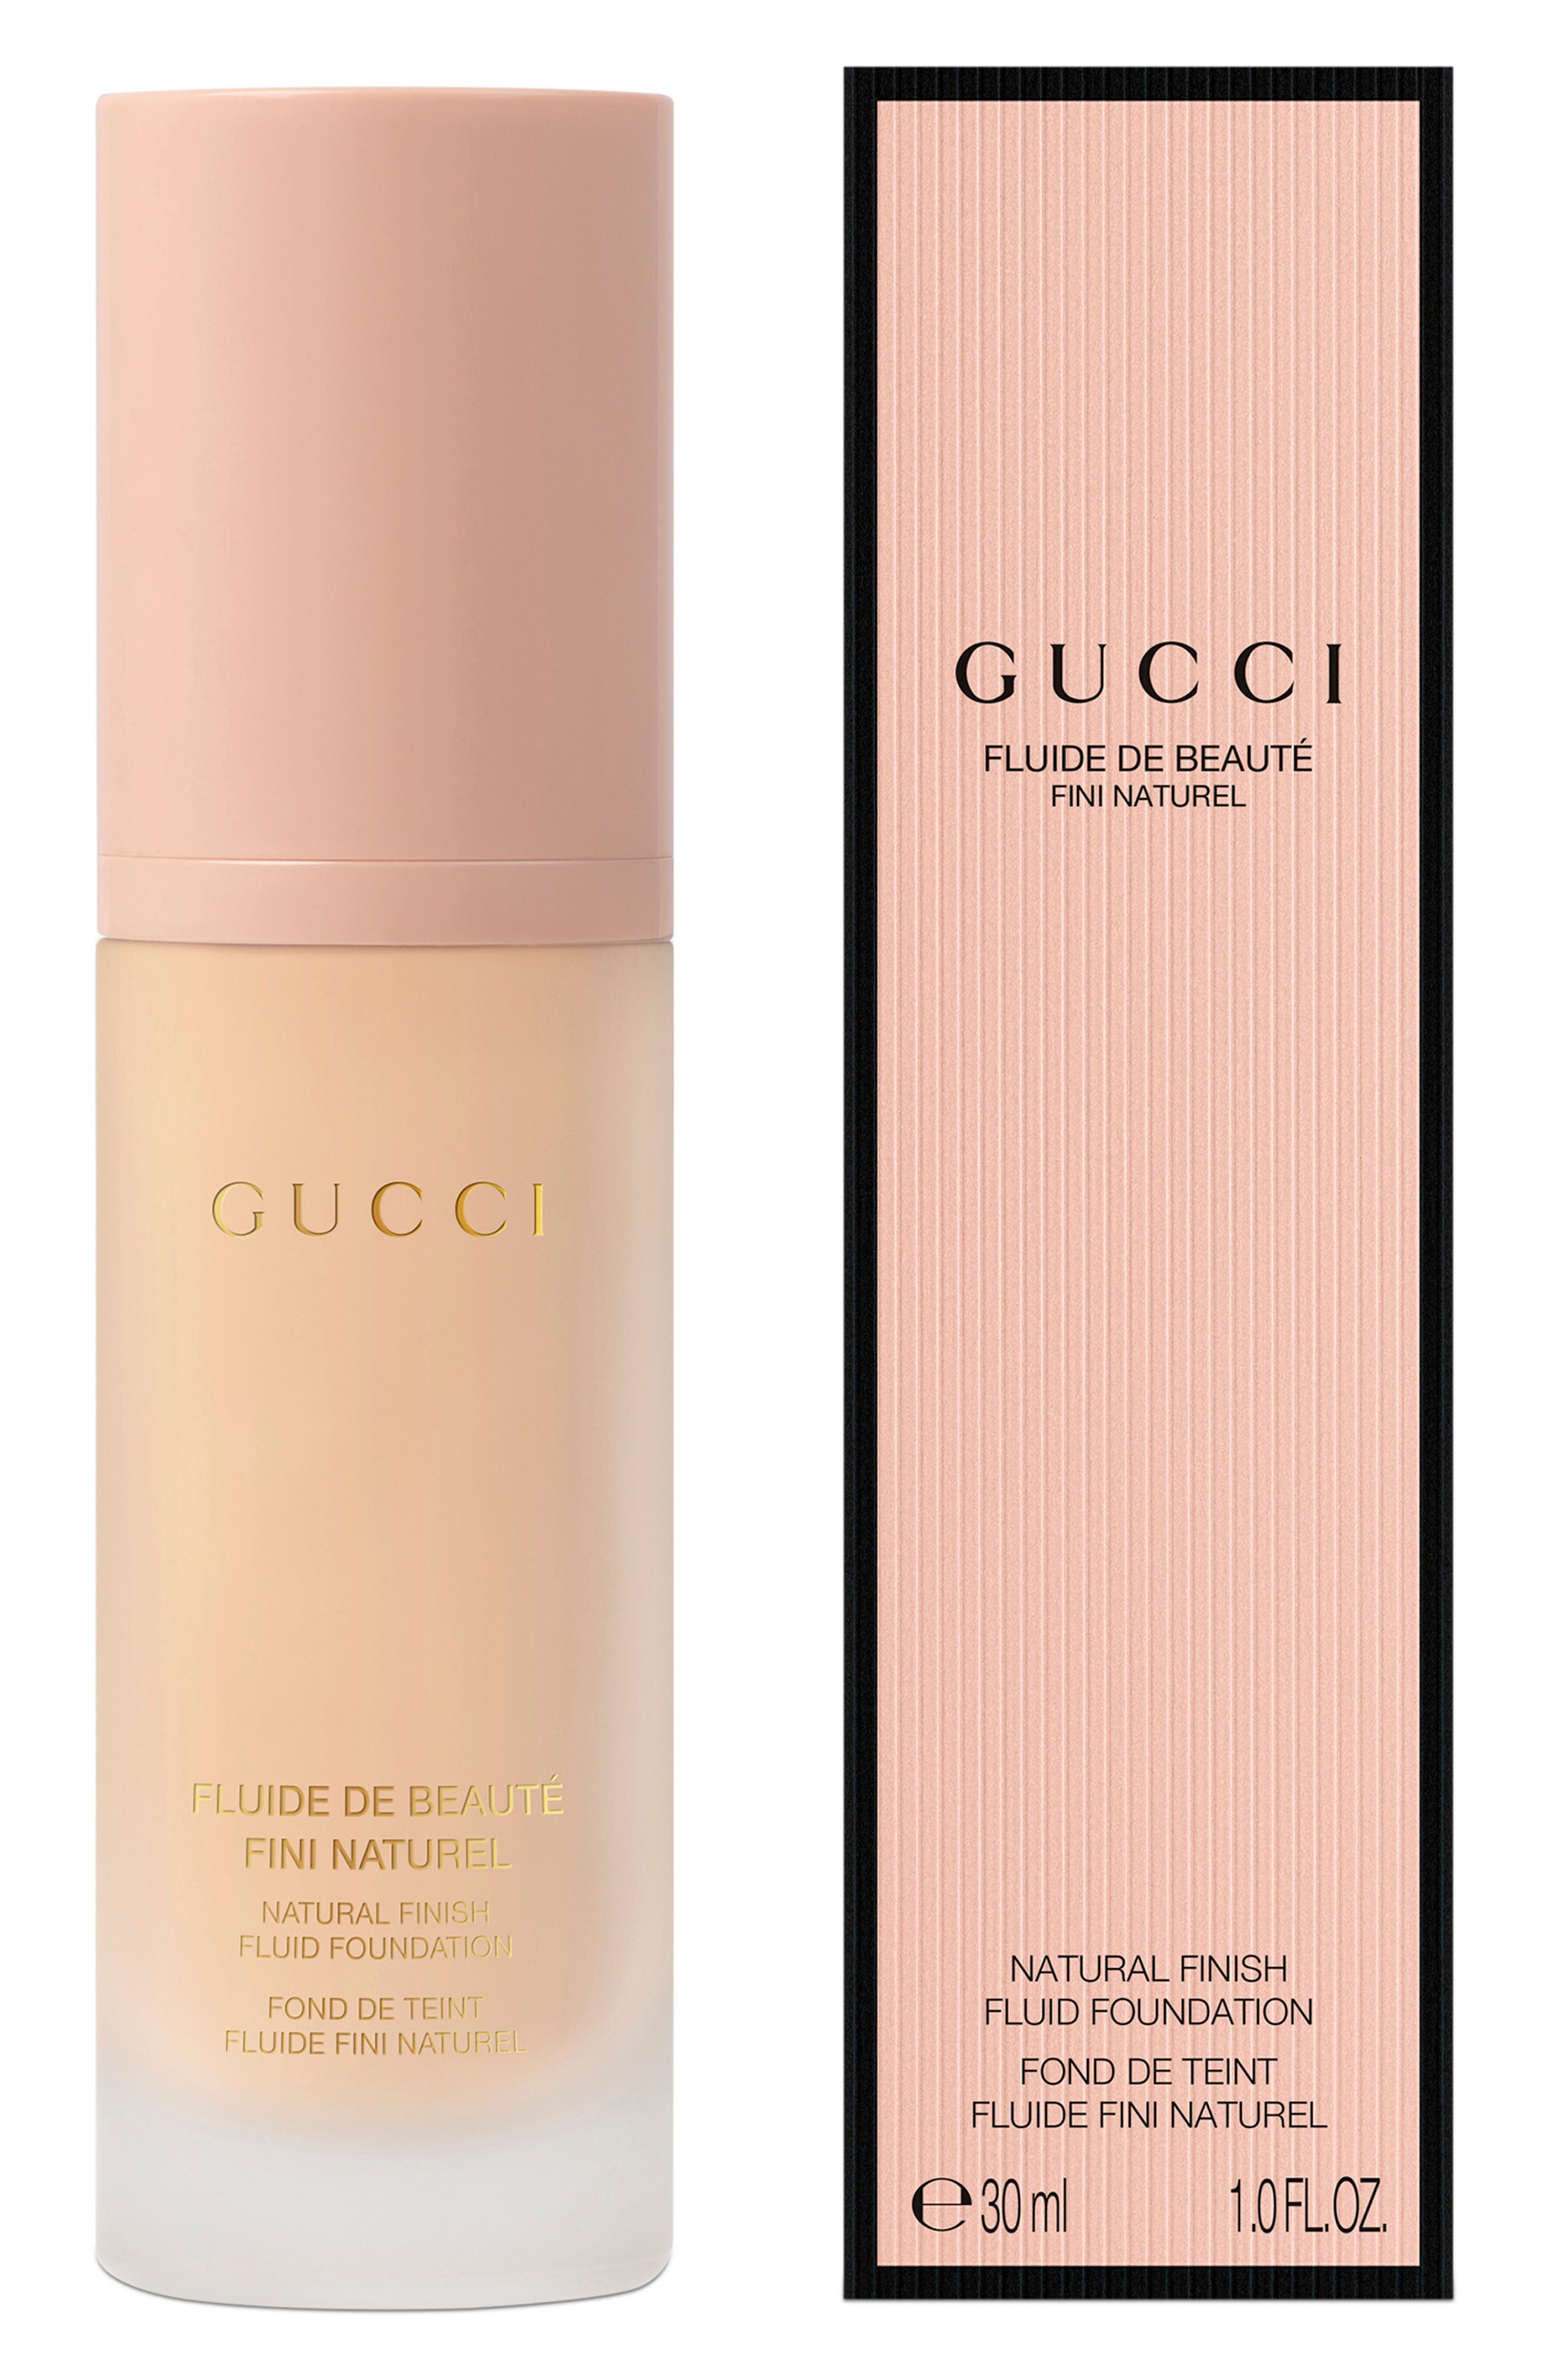 Gucci Natural Finish Fluid Foundation in 130W at Nordstrom